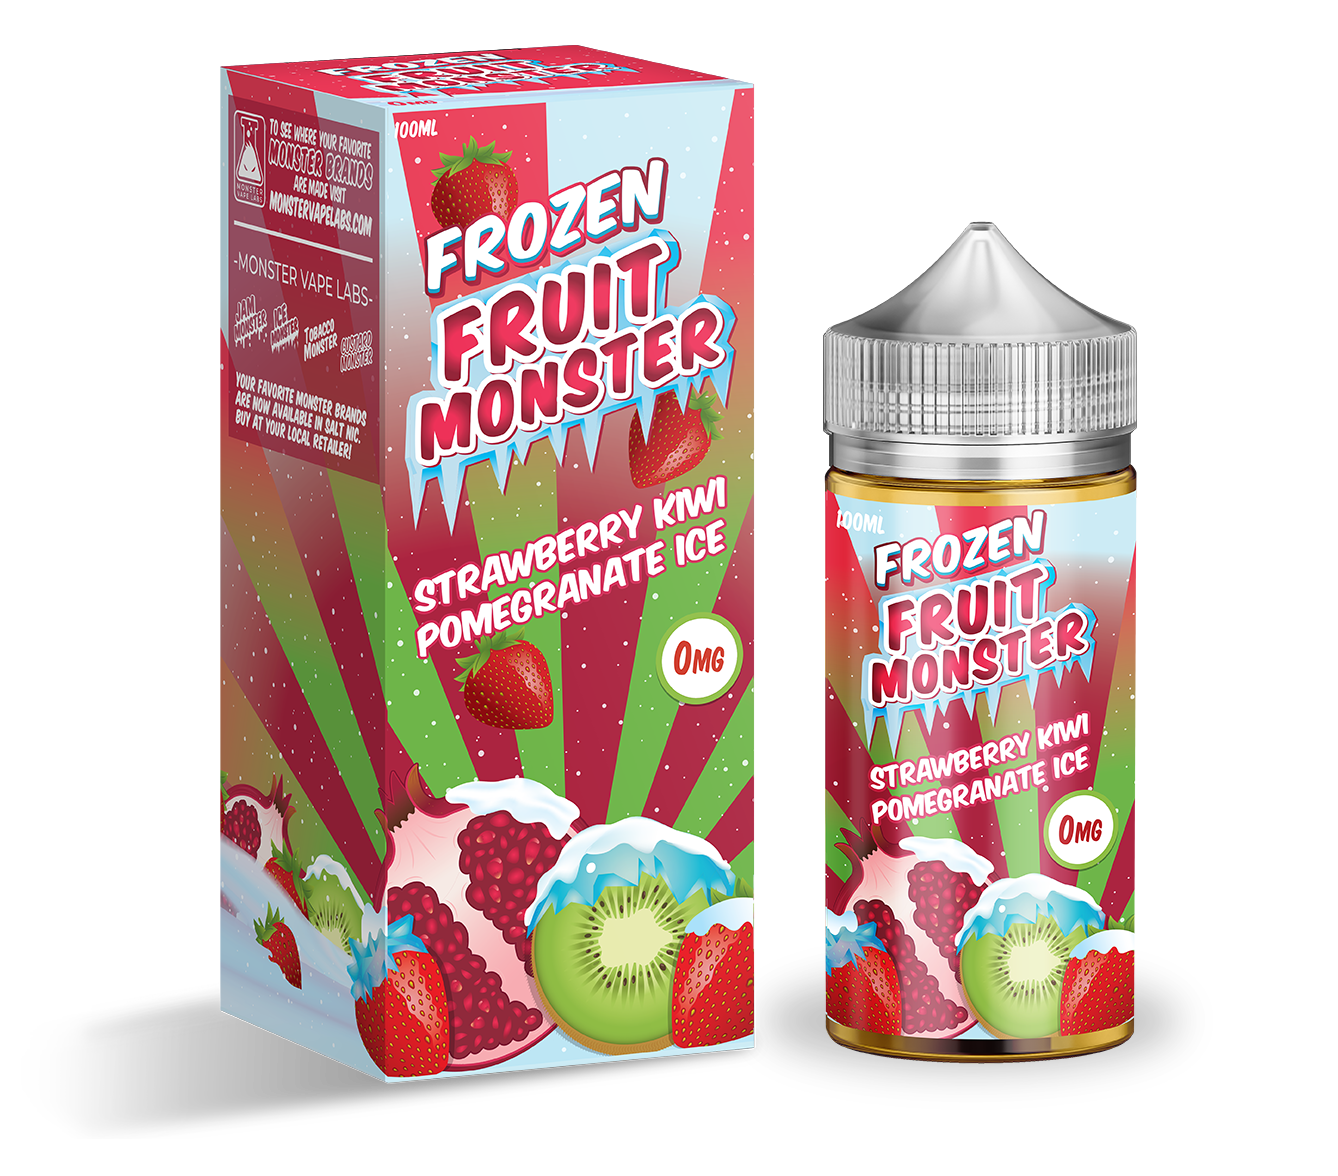 Strawberry Kiwi Pomegranate Ice by Fruit Monster Frozen Collection